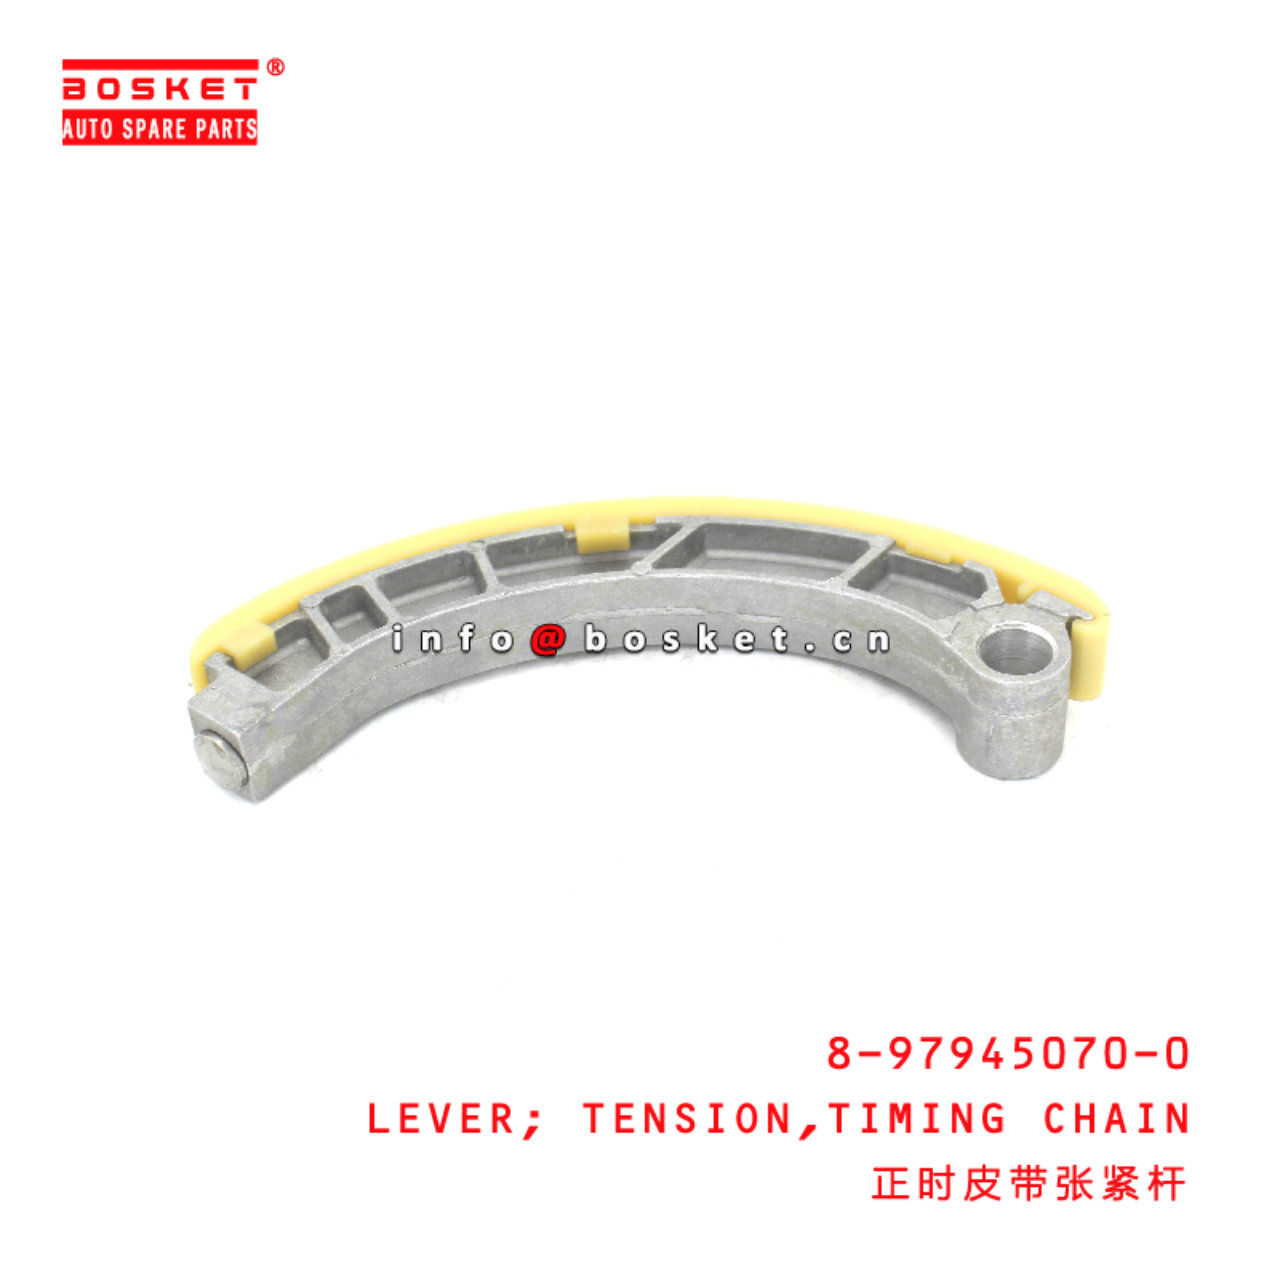 8-97945070-0 Timing Chain Tension Lever suitable f...